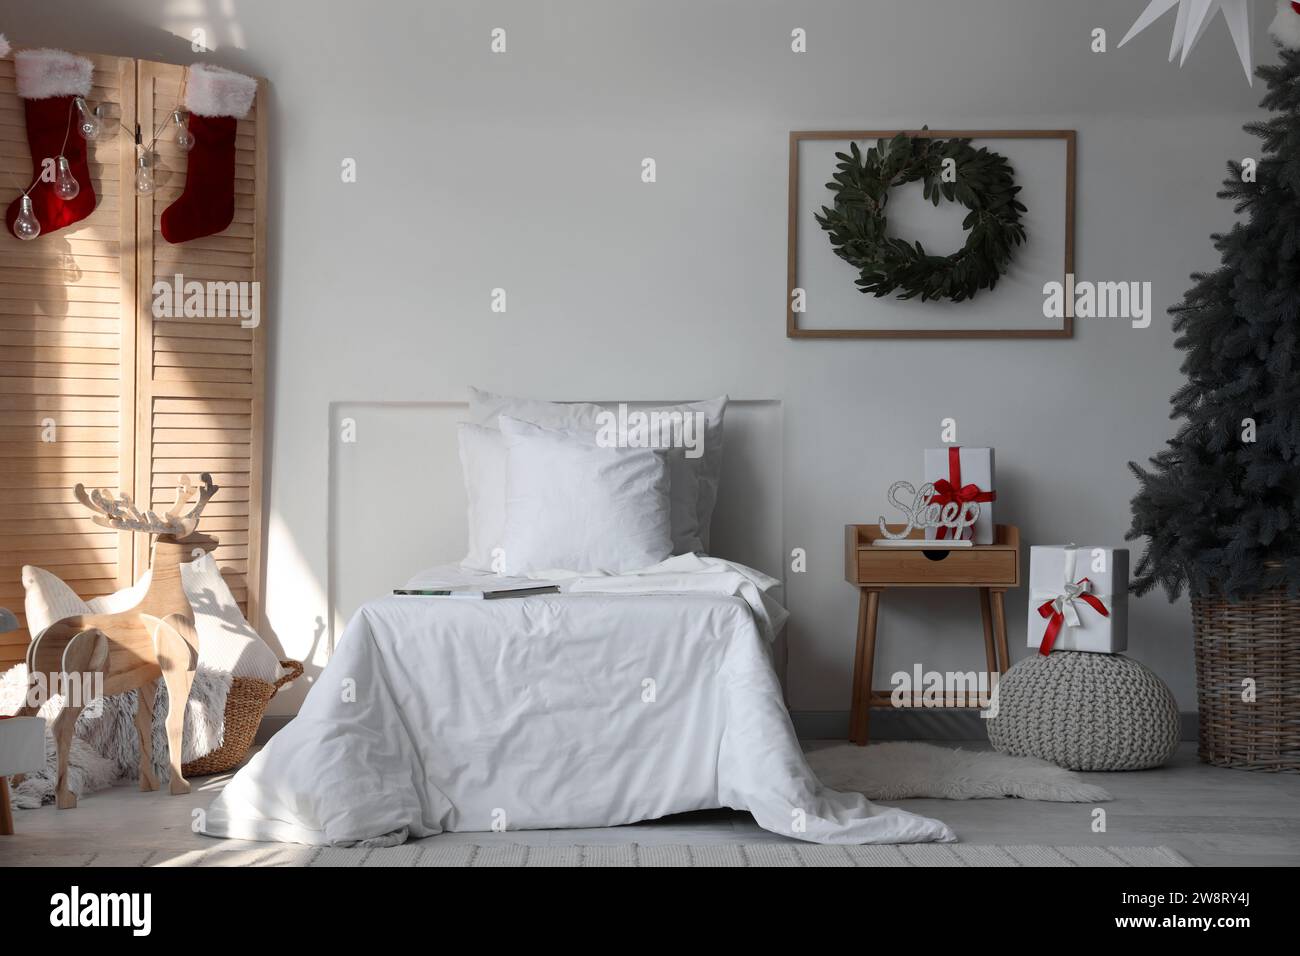 Interior of festive children's bedroom with cozy bed and Christmas decorations Stock Photo